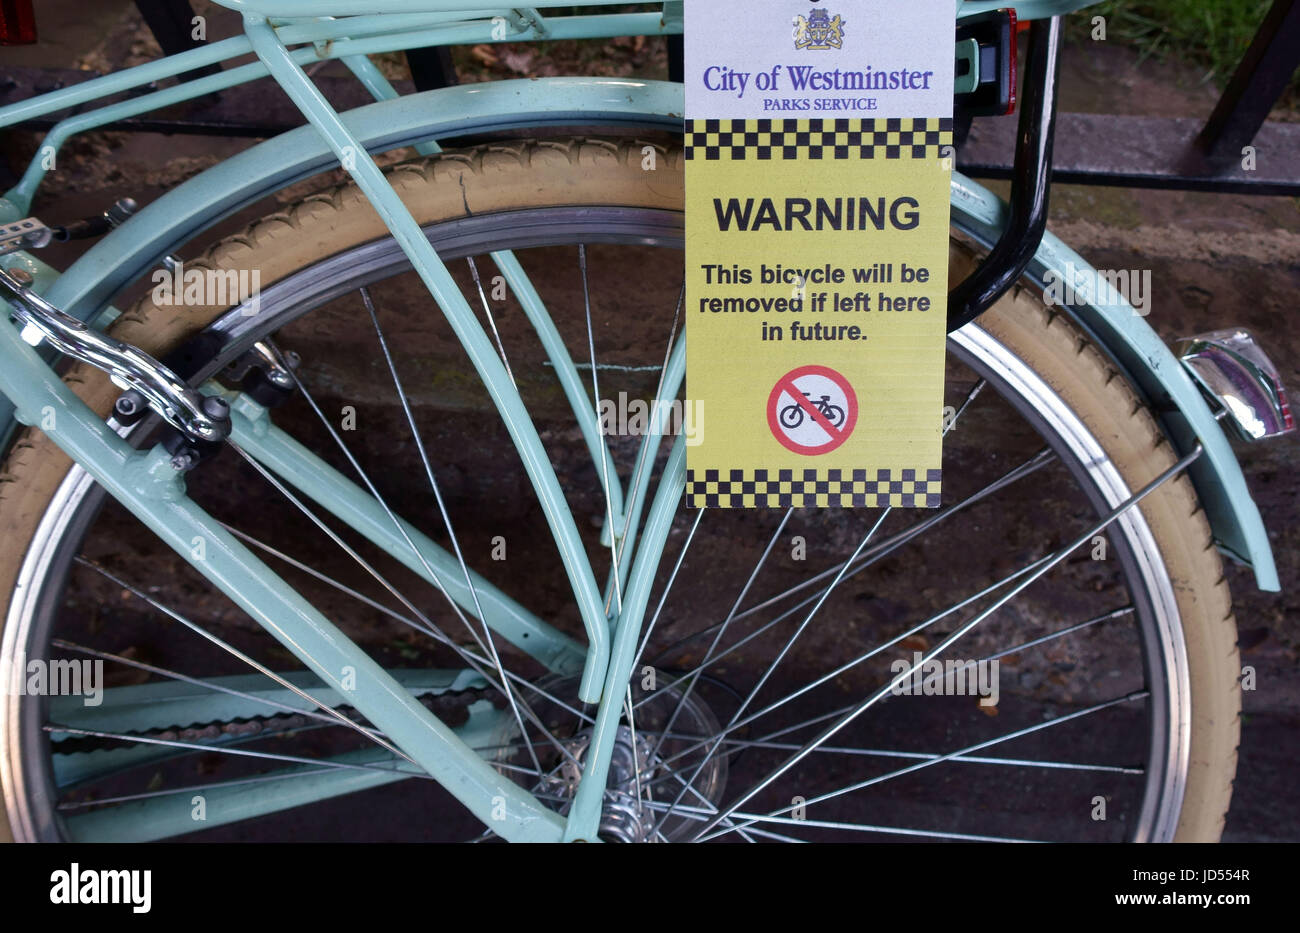 Council warning notice on bicycle about removal Stock Photo